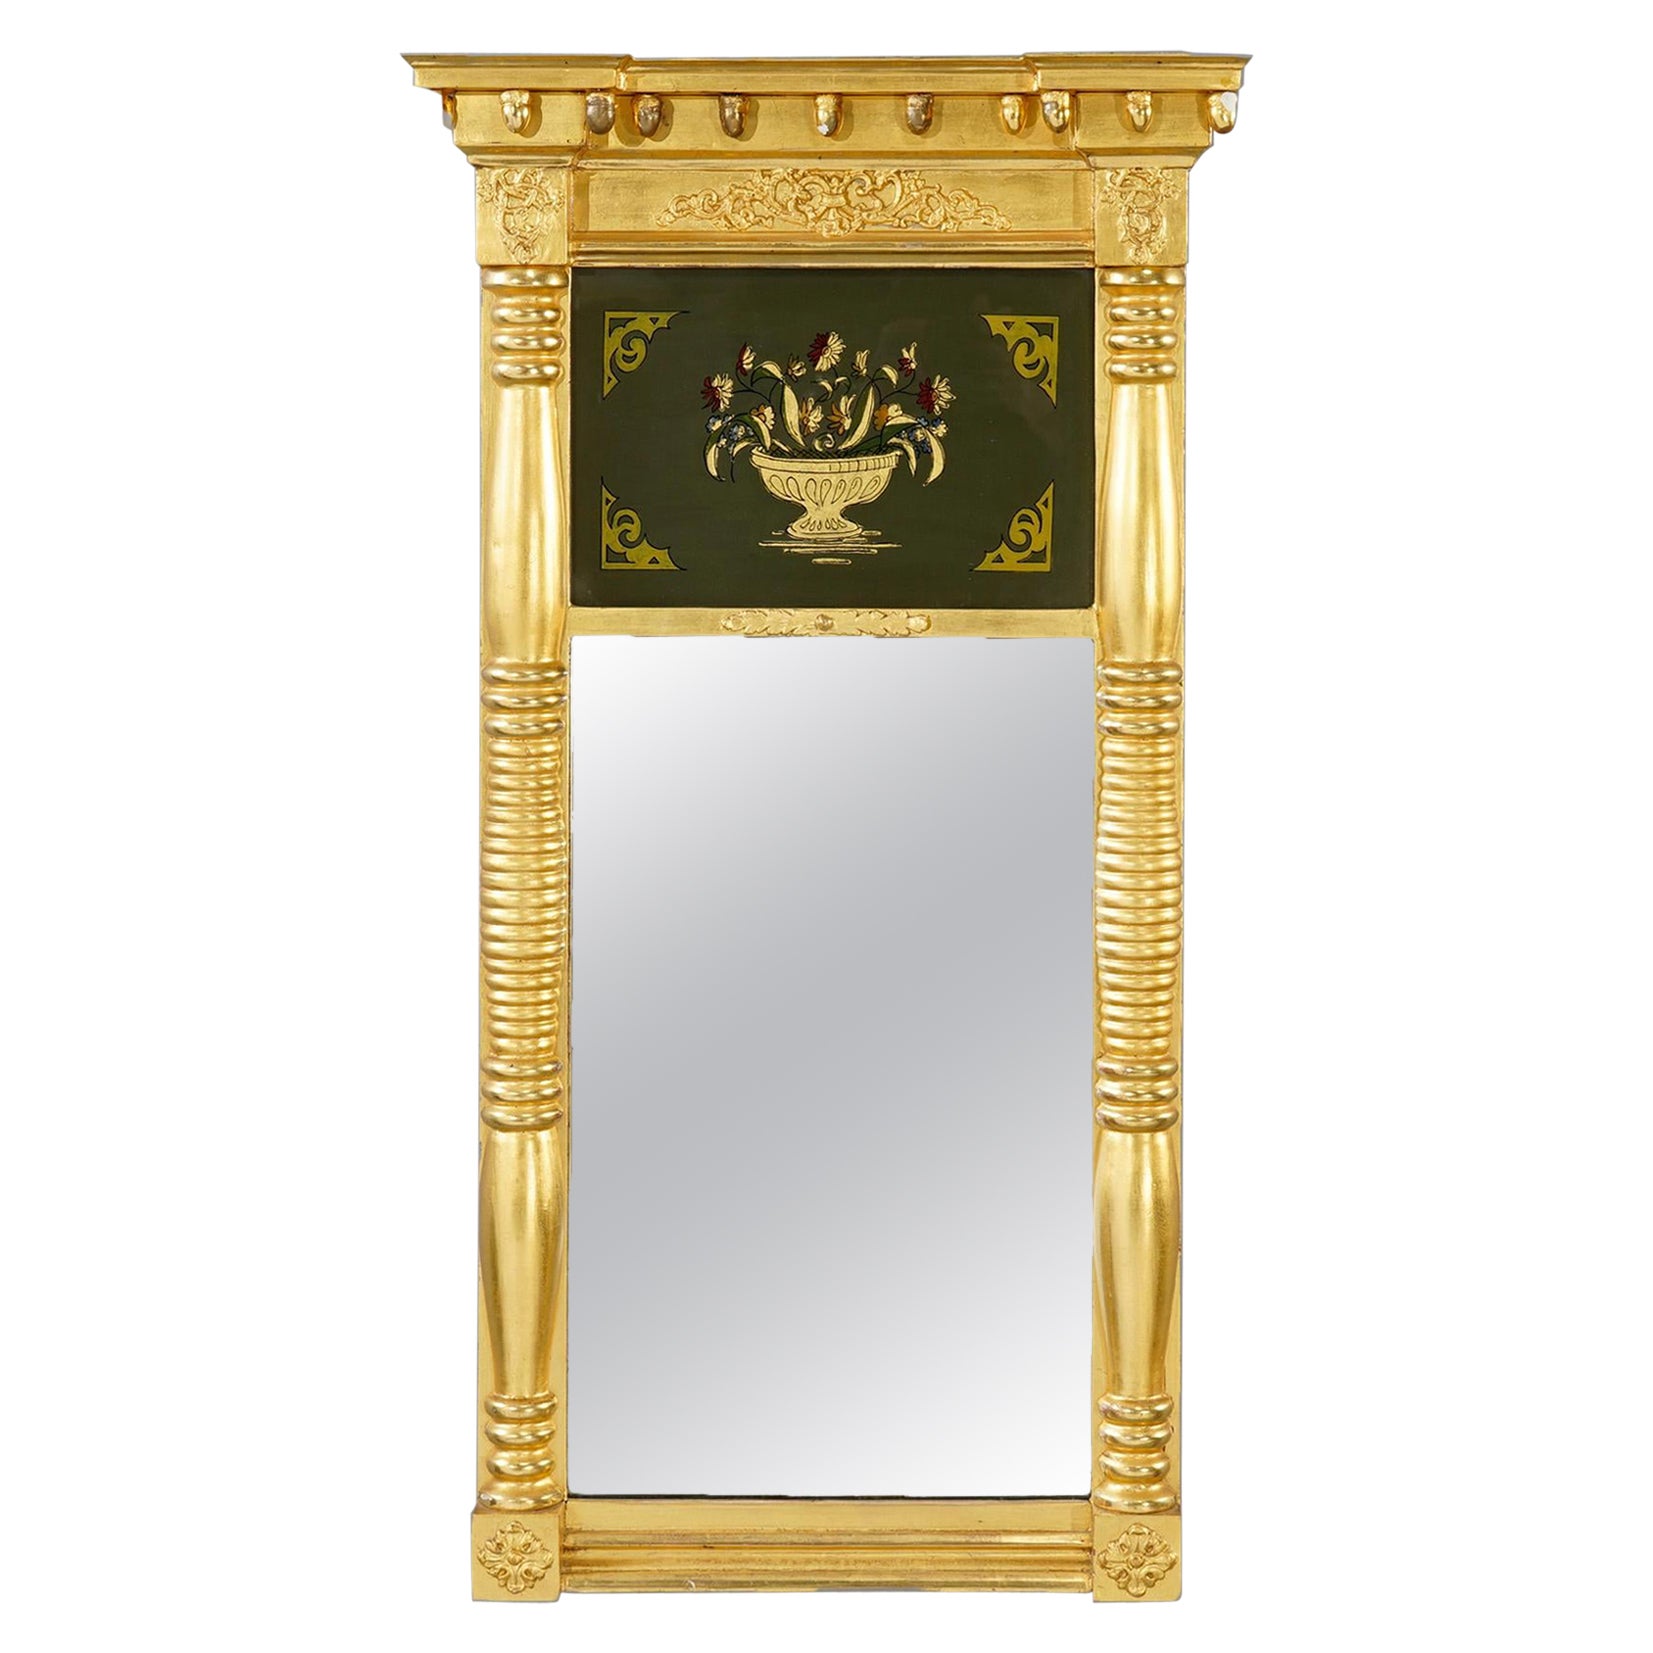 Antique Empire Reverse Painted Still Life Giltwood Trumeau Wall Mirror 19th C For Sale